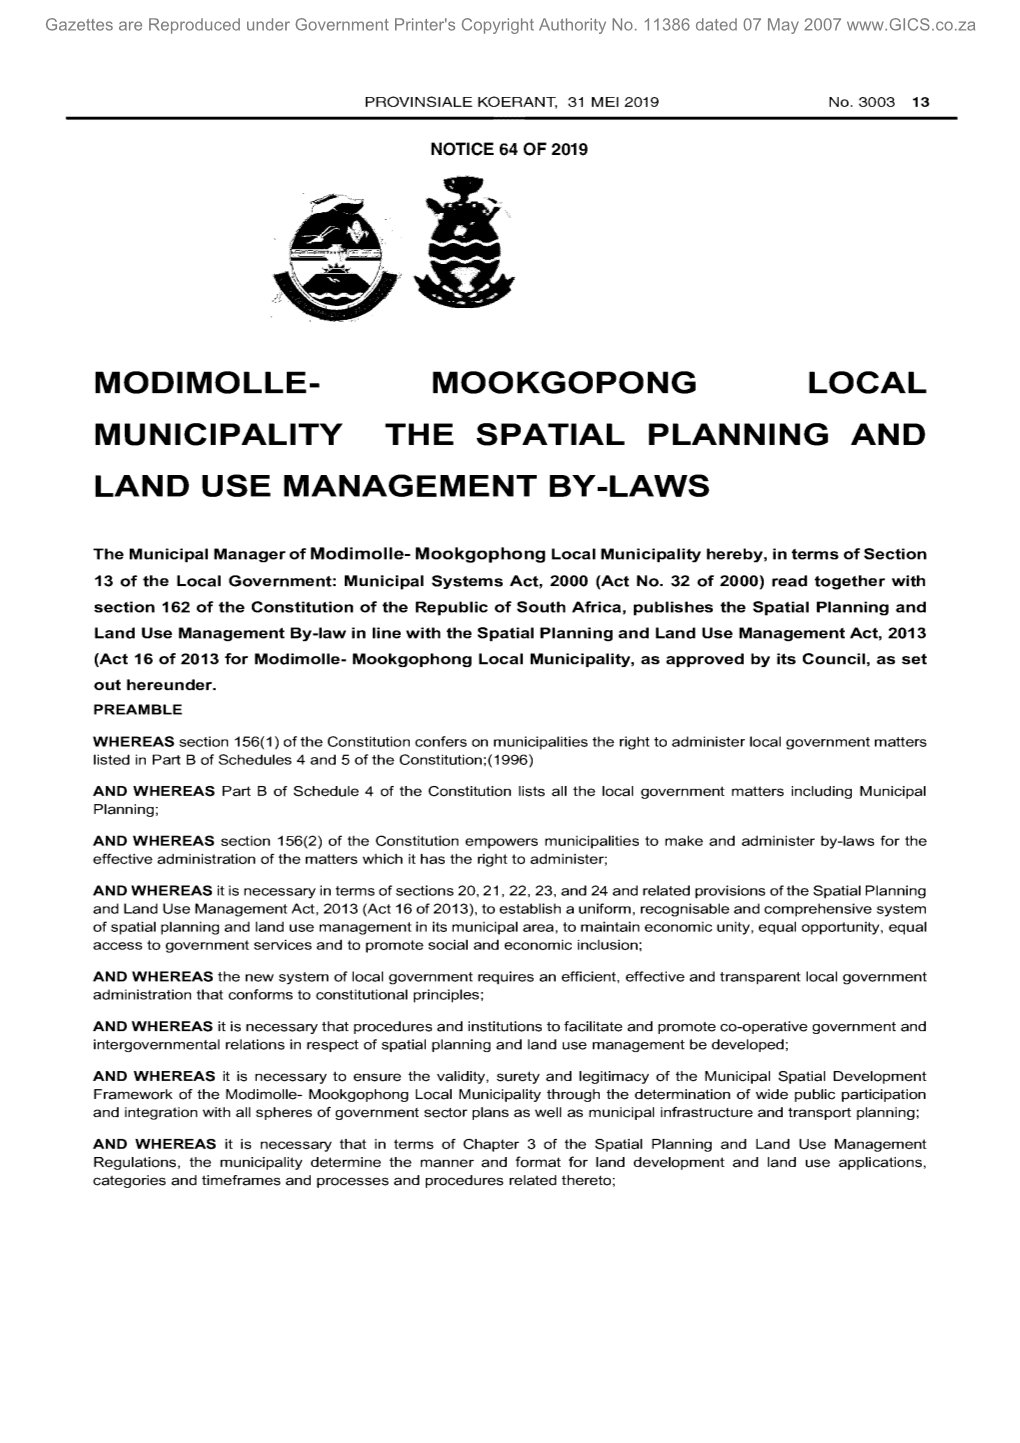 Mookgopong Local Municipality the Spatial Planning and Land Use Management By-Laws